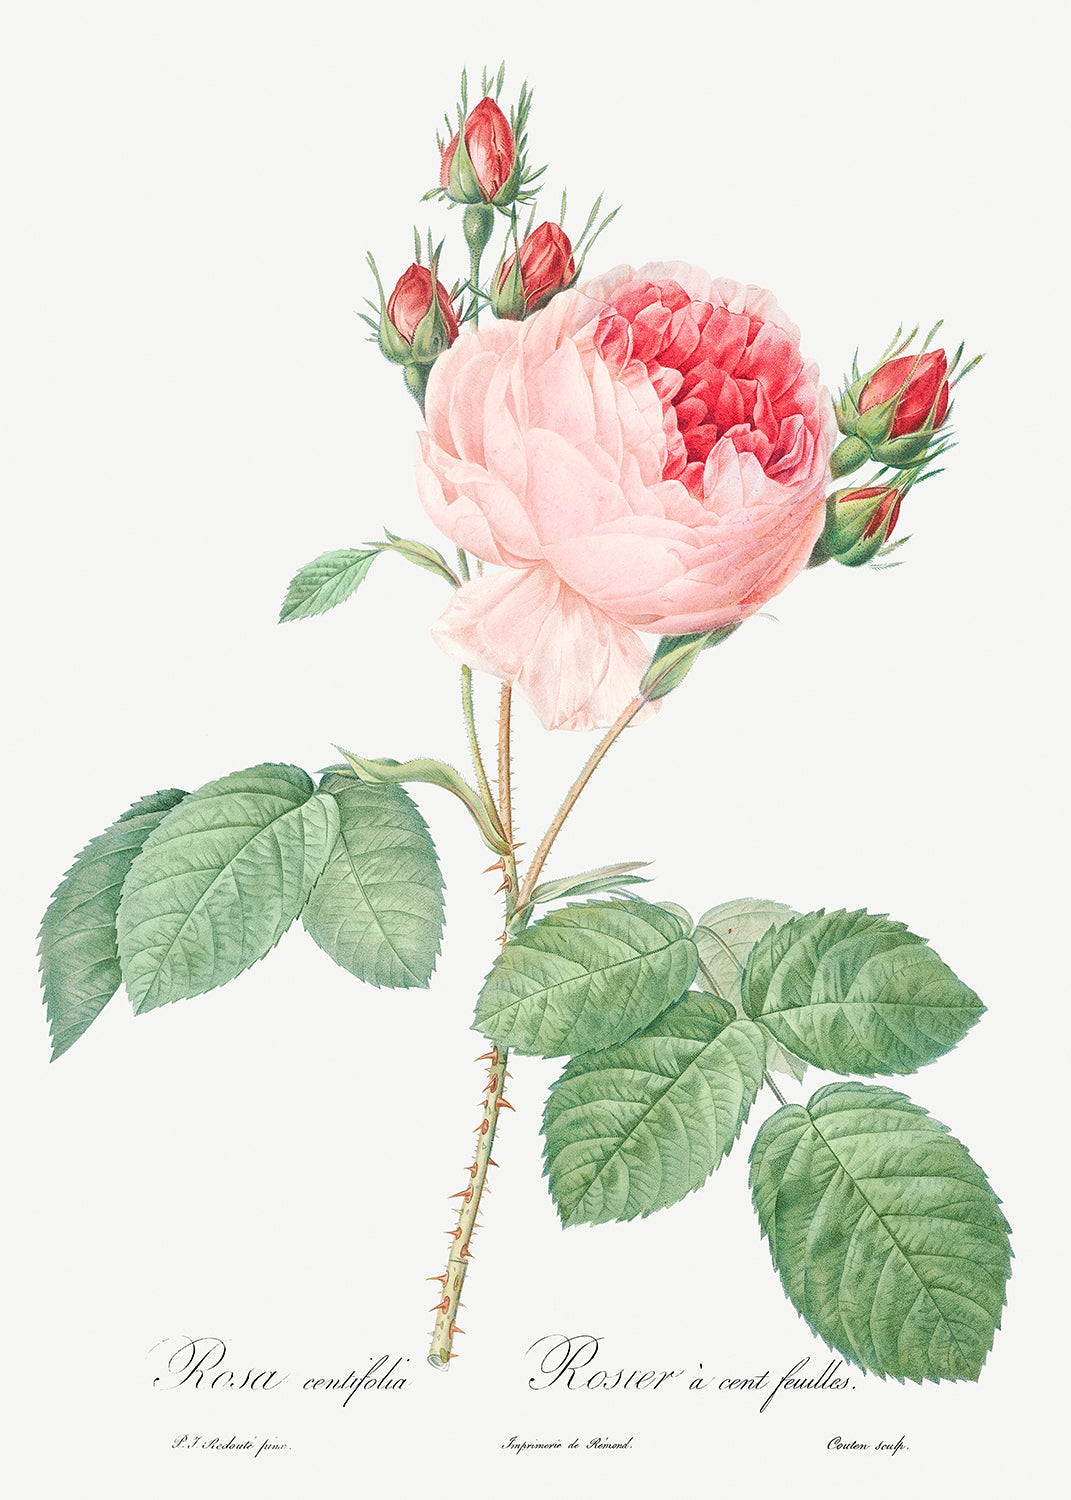 Botanical Plant Print - Cabbage Rose - One Hundred-Leaved Rose (Rosa centifolia) by Pierre Joseph Redoute